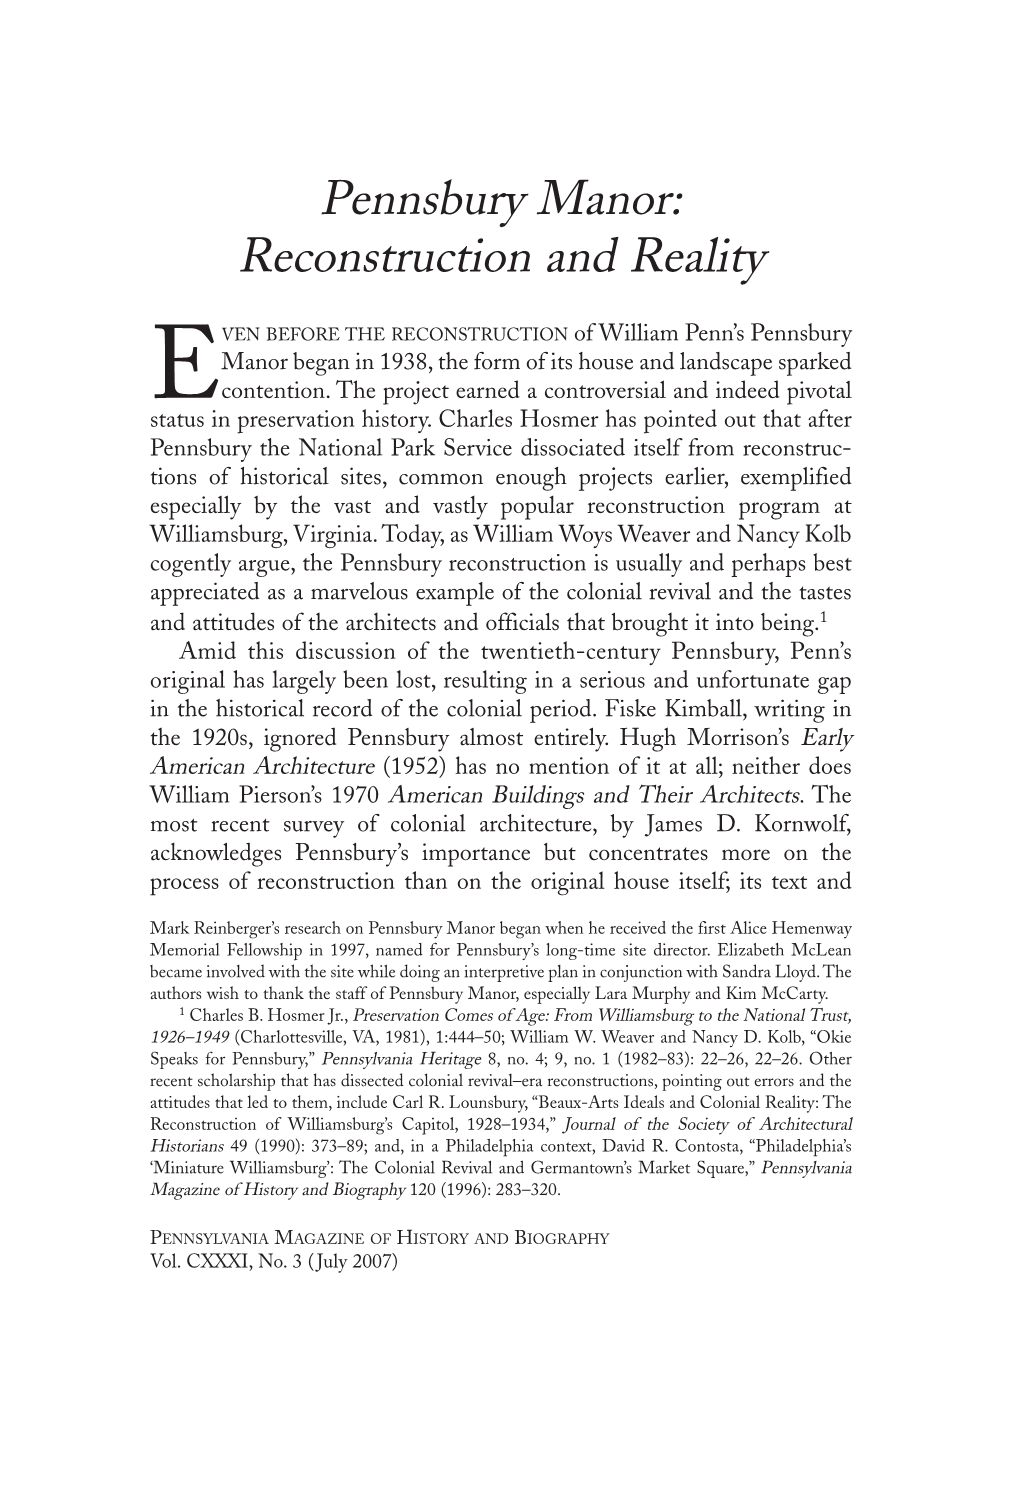 Pennsbury Manor: Reconstruction and Reality